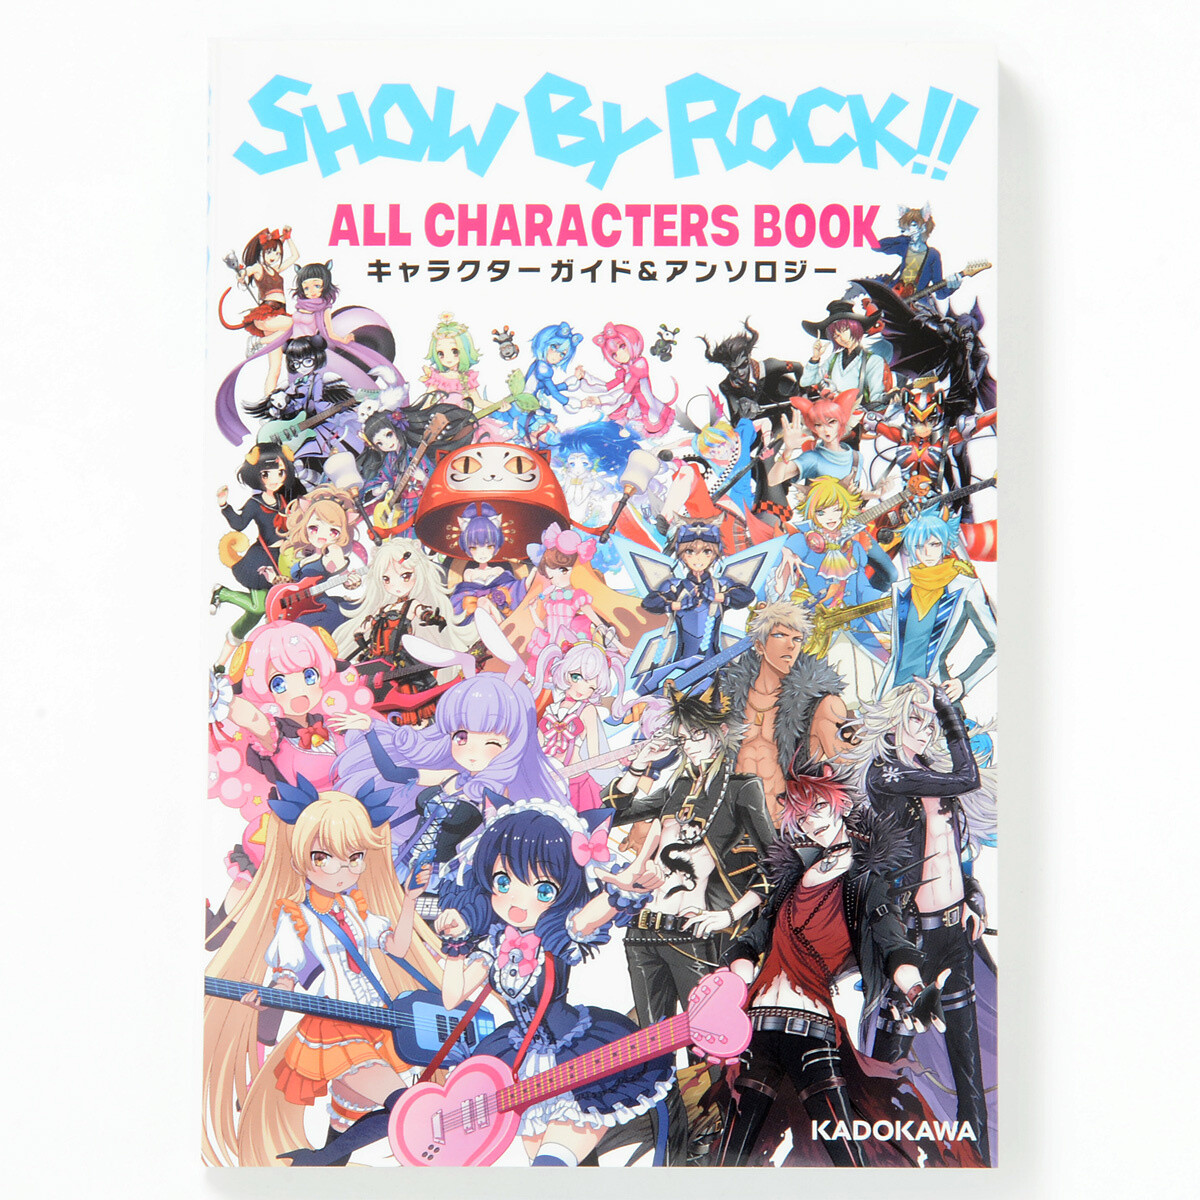 Category:Characters, Show By Rock!! Wiki